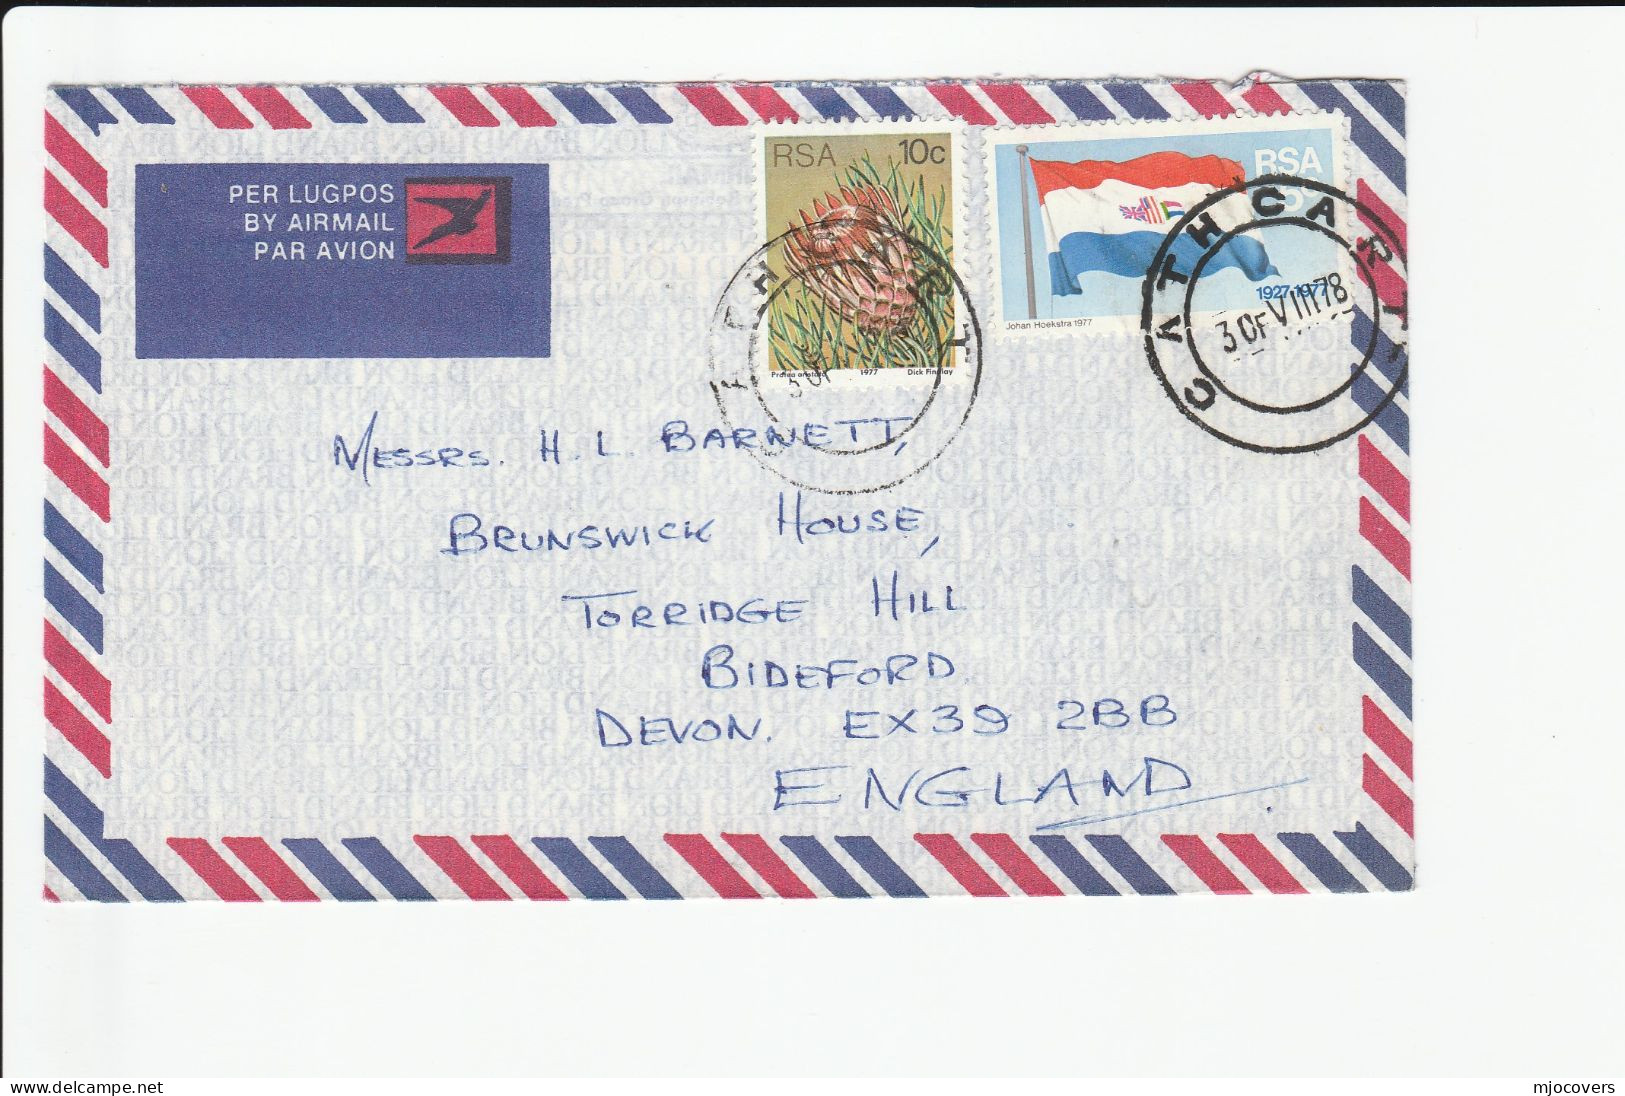 FLAGS - 1978 -1994 SOUTH AFRICA Covers FLAG Stamps Cover Air Mail To GB - Enveloppes